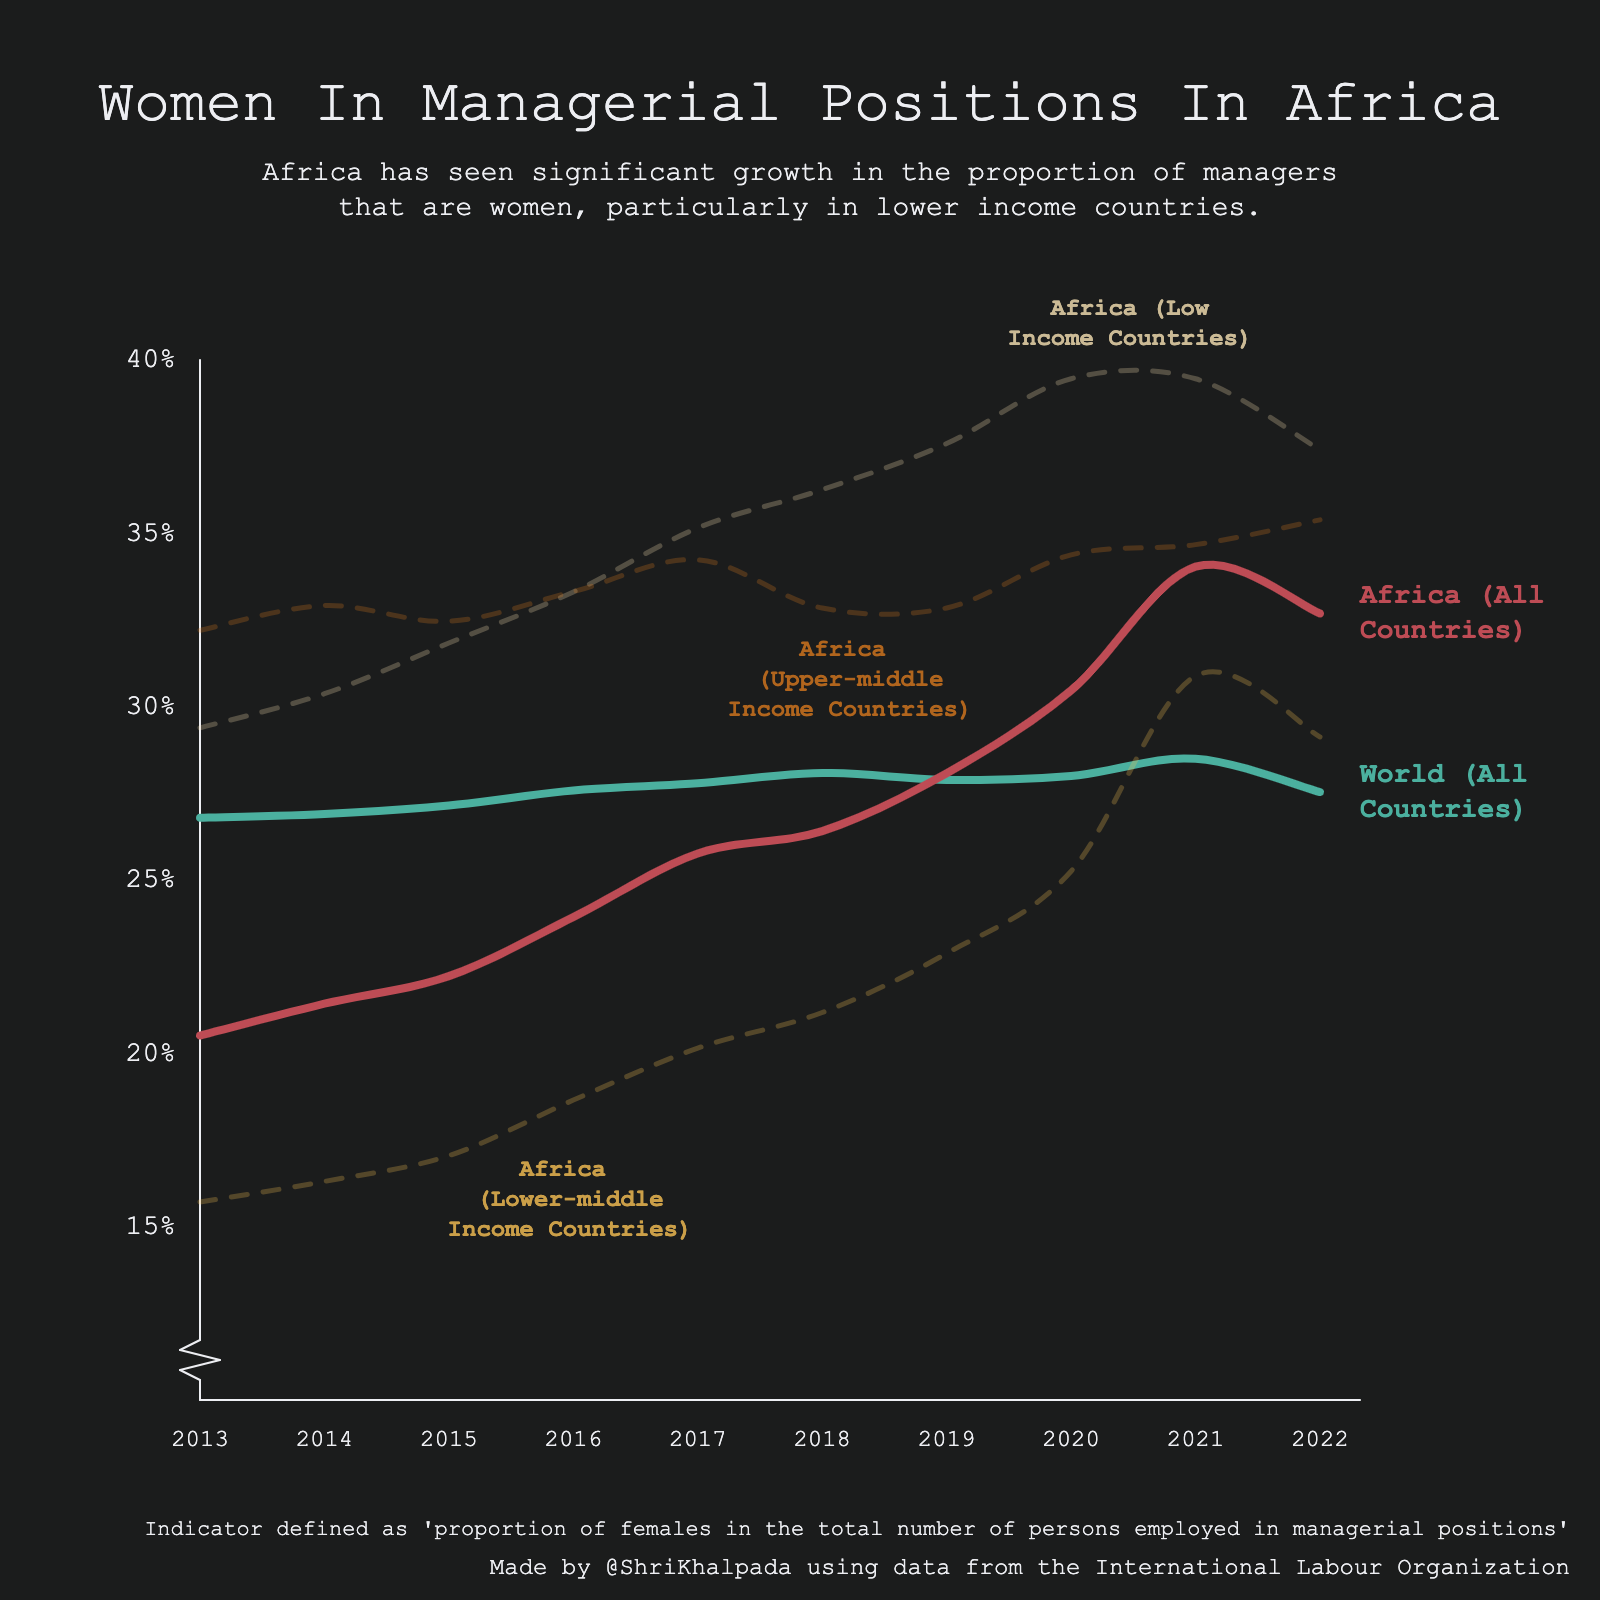 A line graph titled "Women In Managerial Positions In Africa" showing the increasing trend of women in managerial roles, with lines representing different income brackets of African countries and the world average.